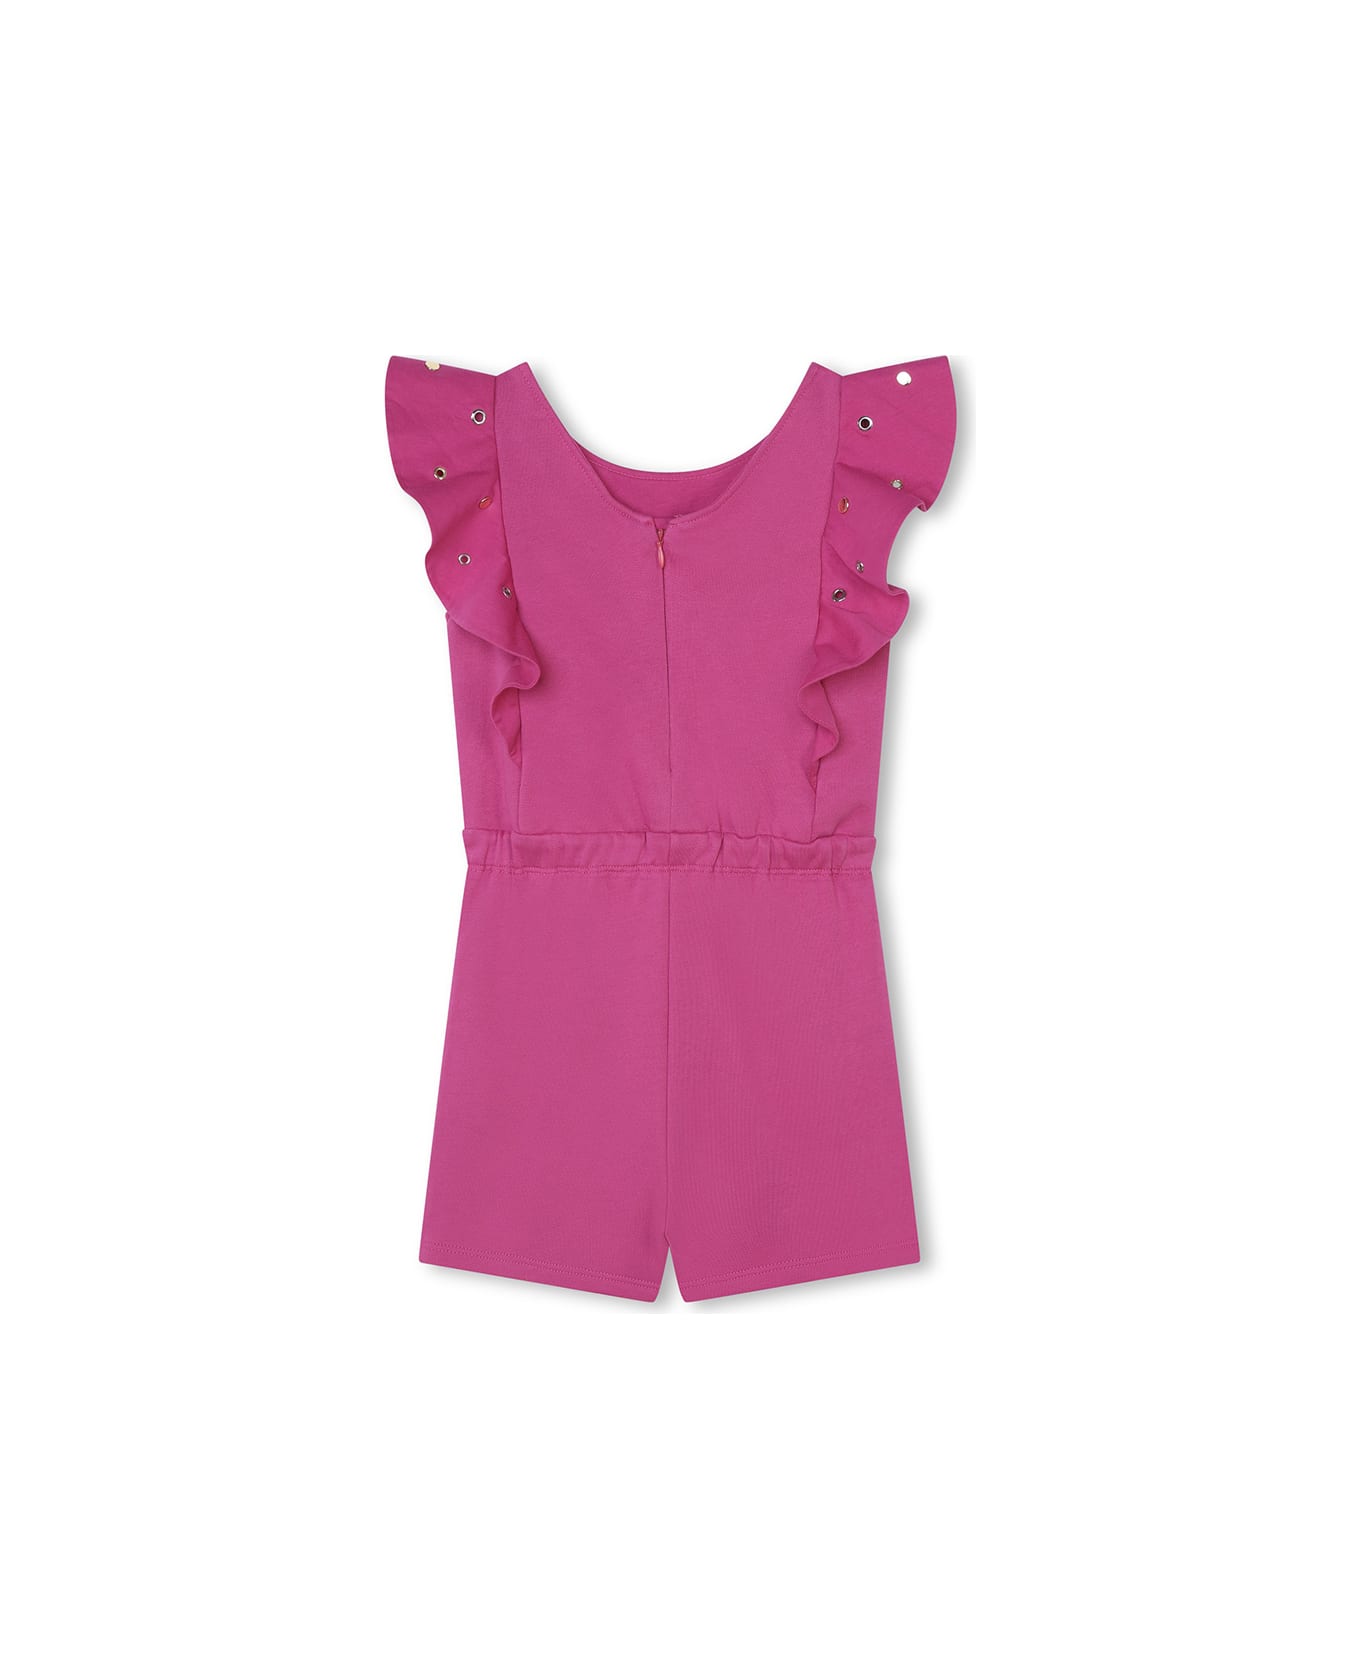 Chloé Fuchsia Jumpsuit With Ruffles And Studs - Pink